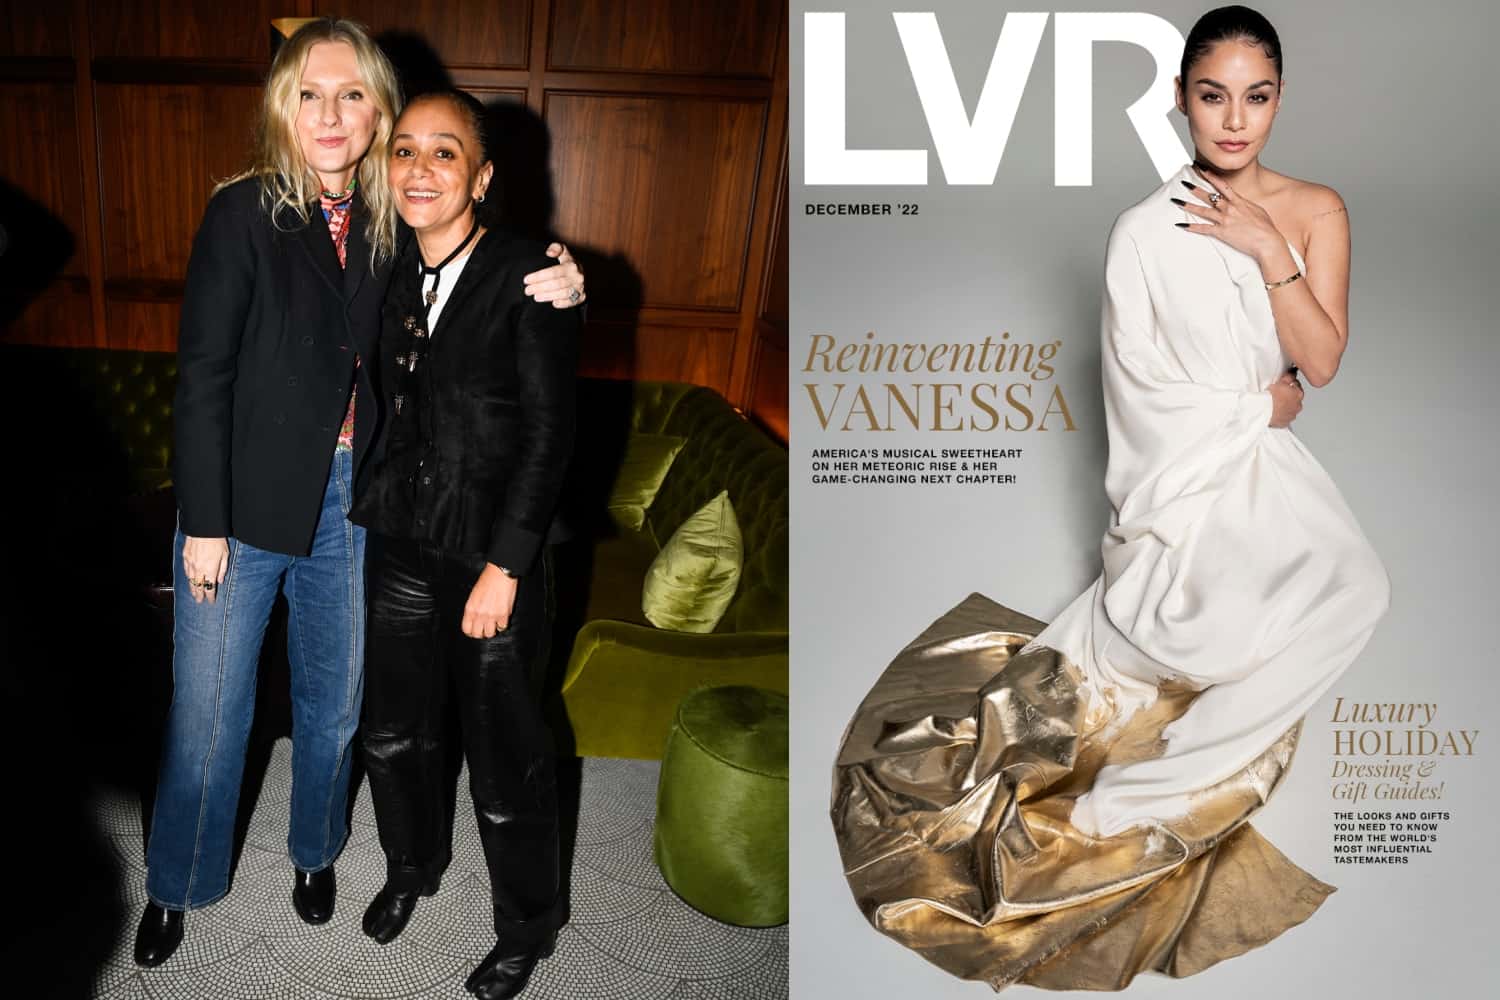 Fashion Trust US Launch, Vanessa Hudgens Covers LVR Magazine, Holiday Windows Galore, Ring Concierge Lands On The UES, And More!